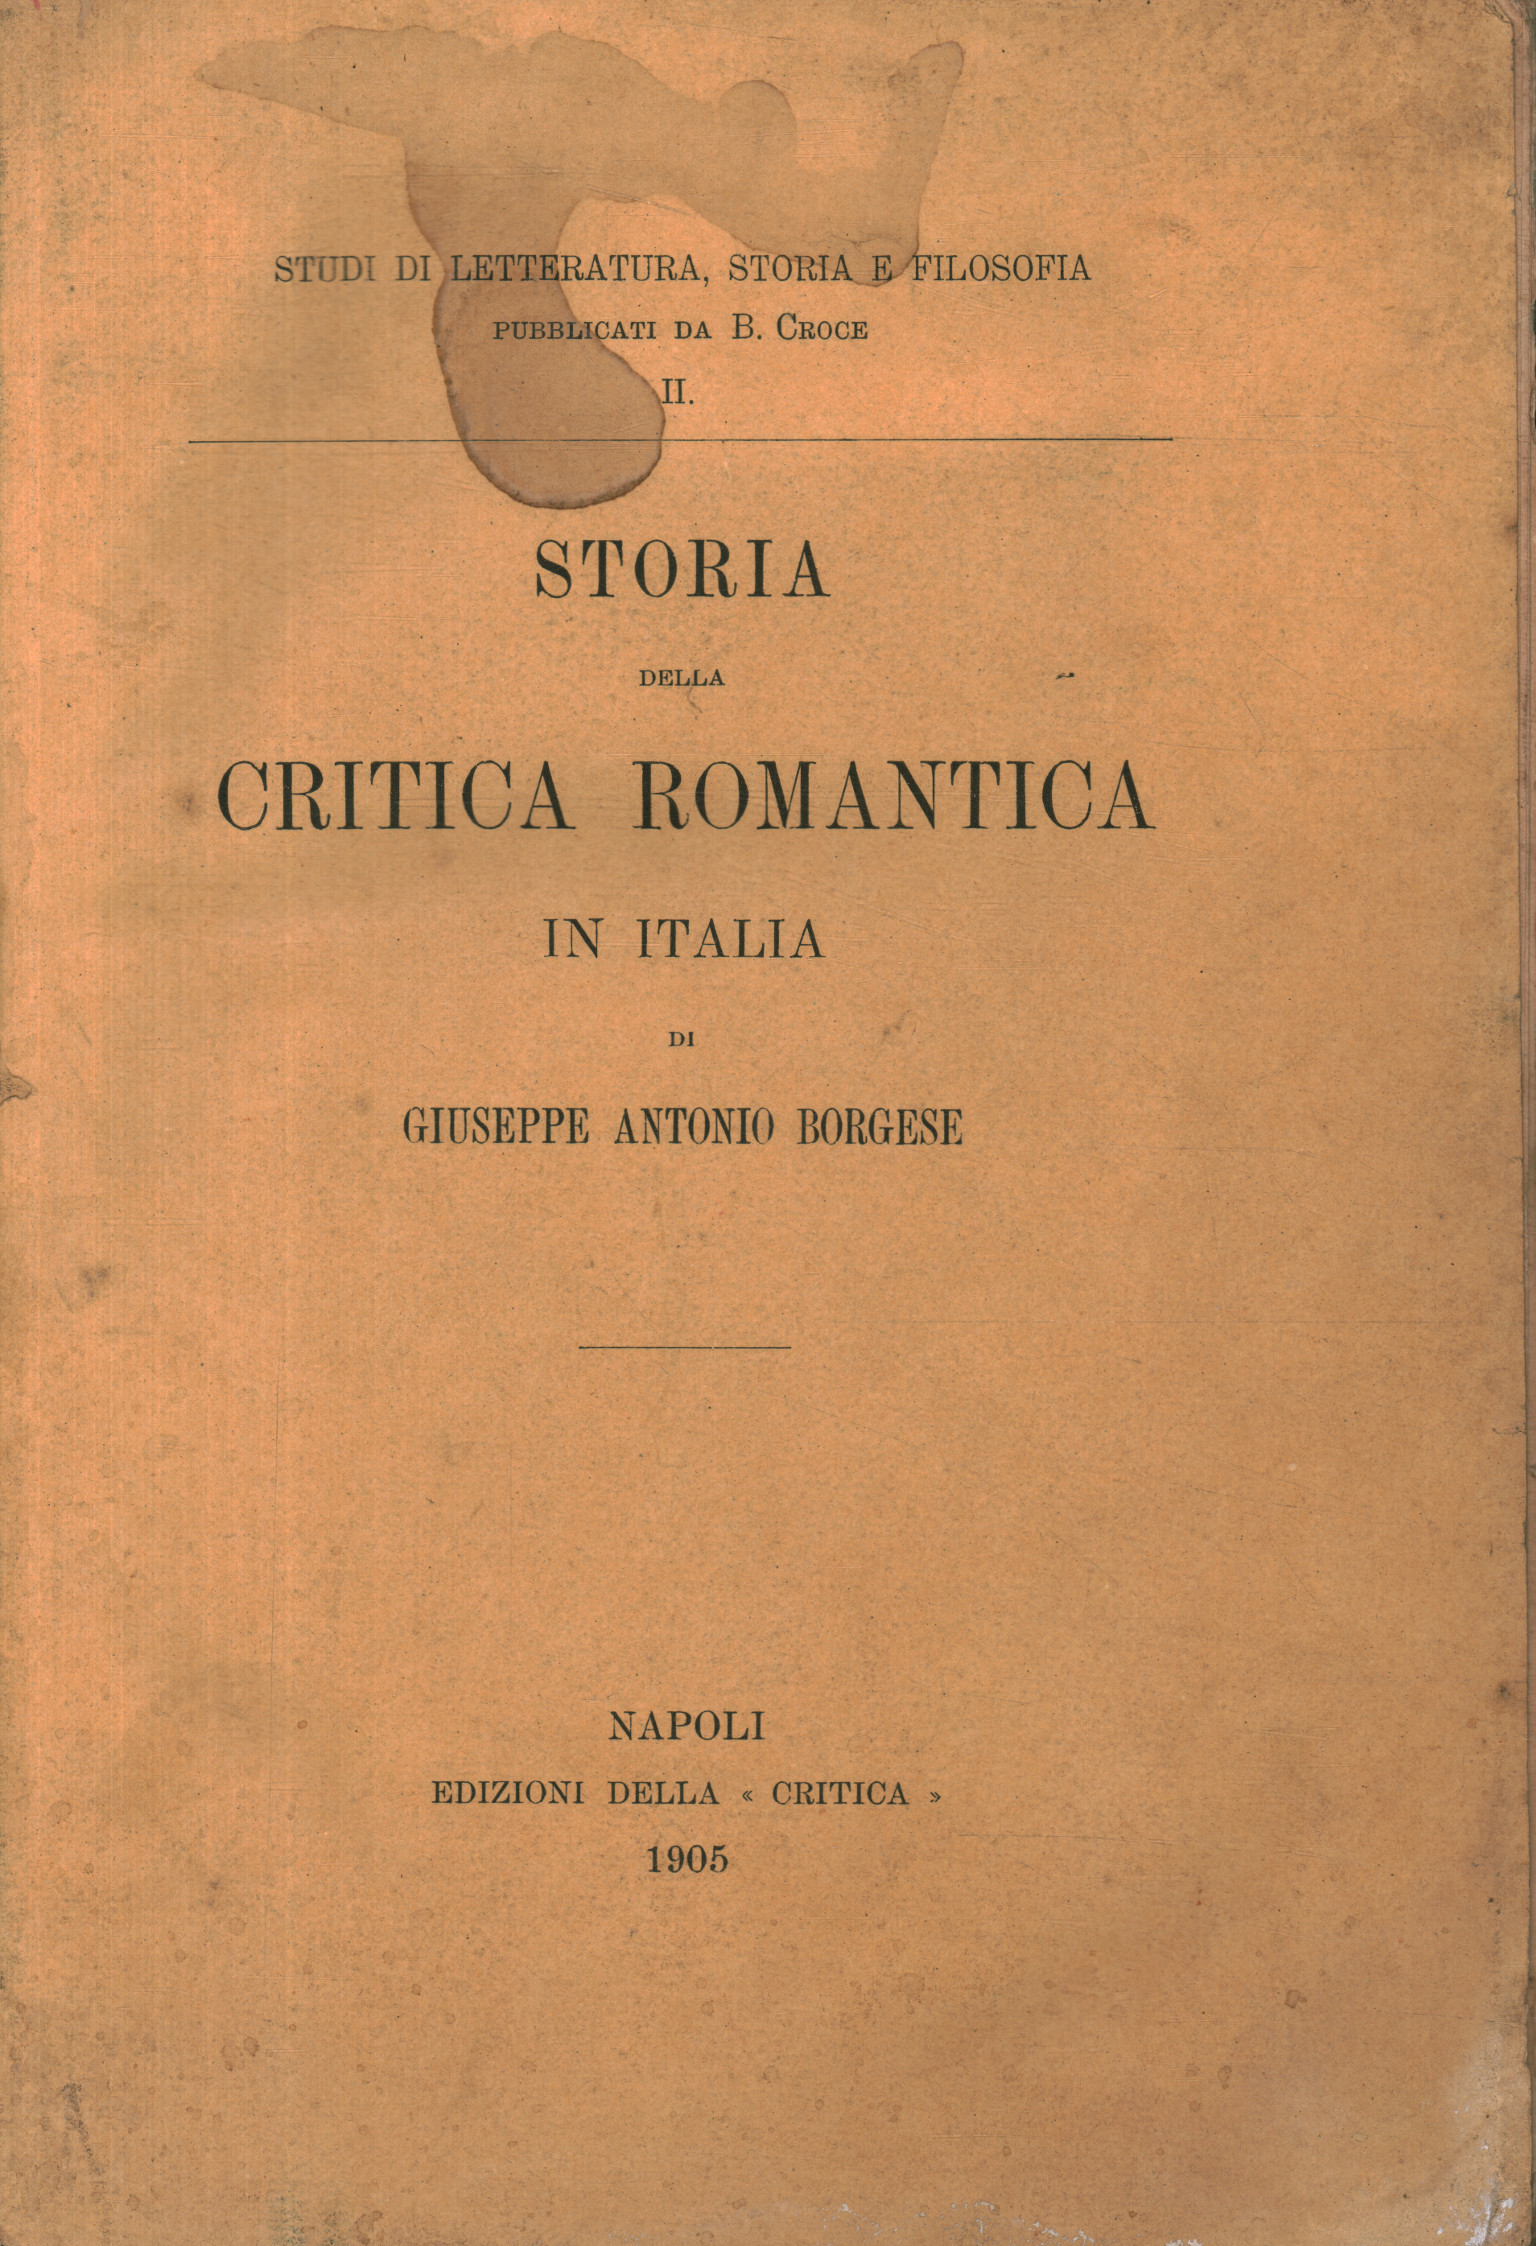 History of romantic criticism in Italy